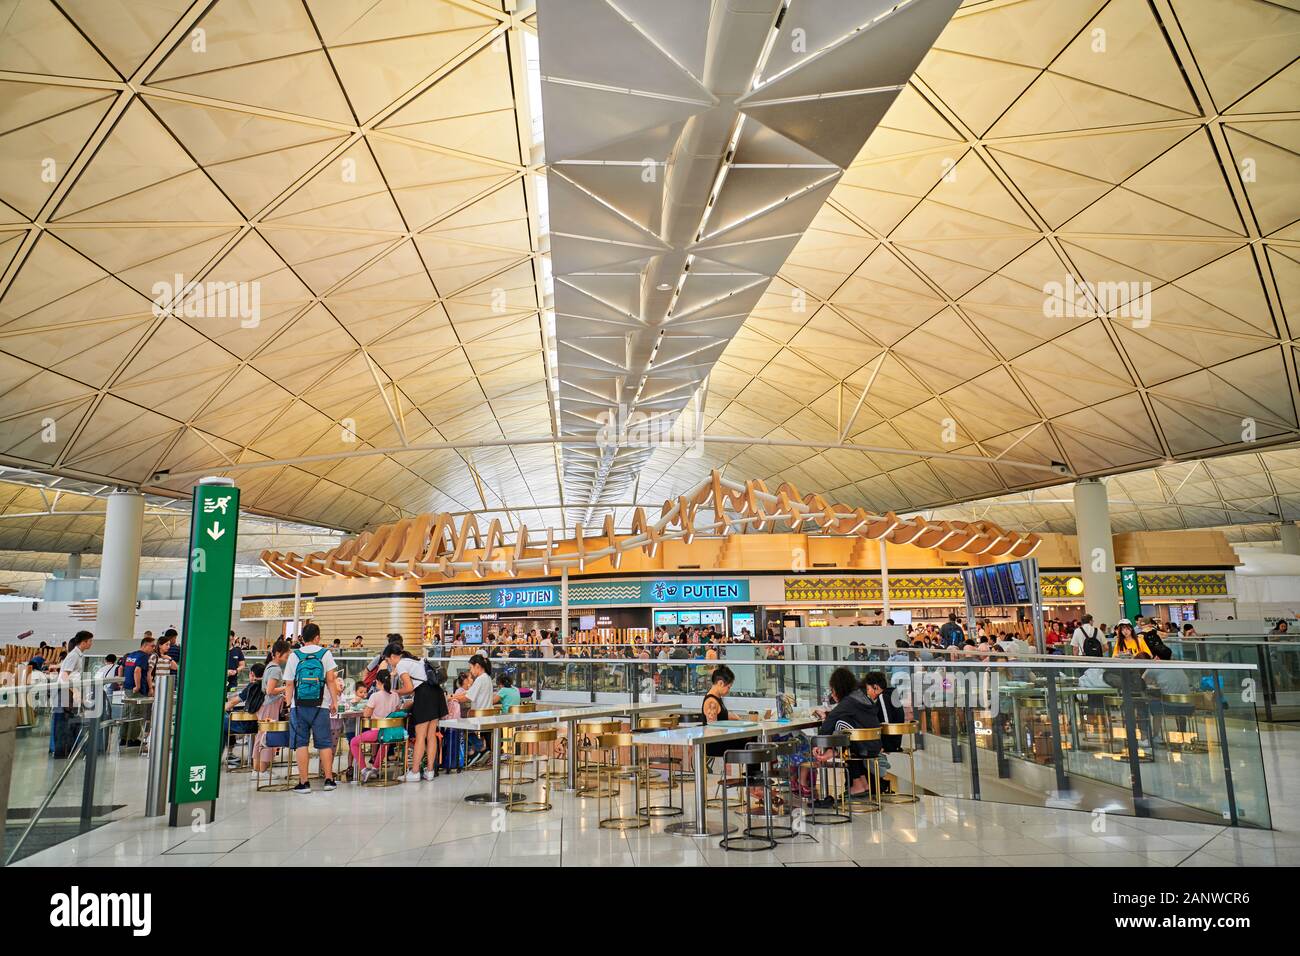 Hong Kong: Tourists at restaurants in the transit area inside Hong Kong International Airport with its futuristic architecture Stock Photo